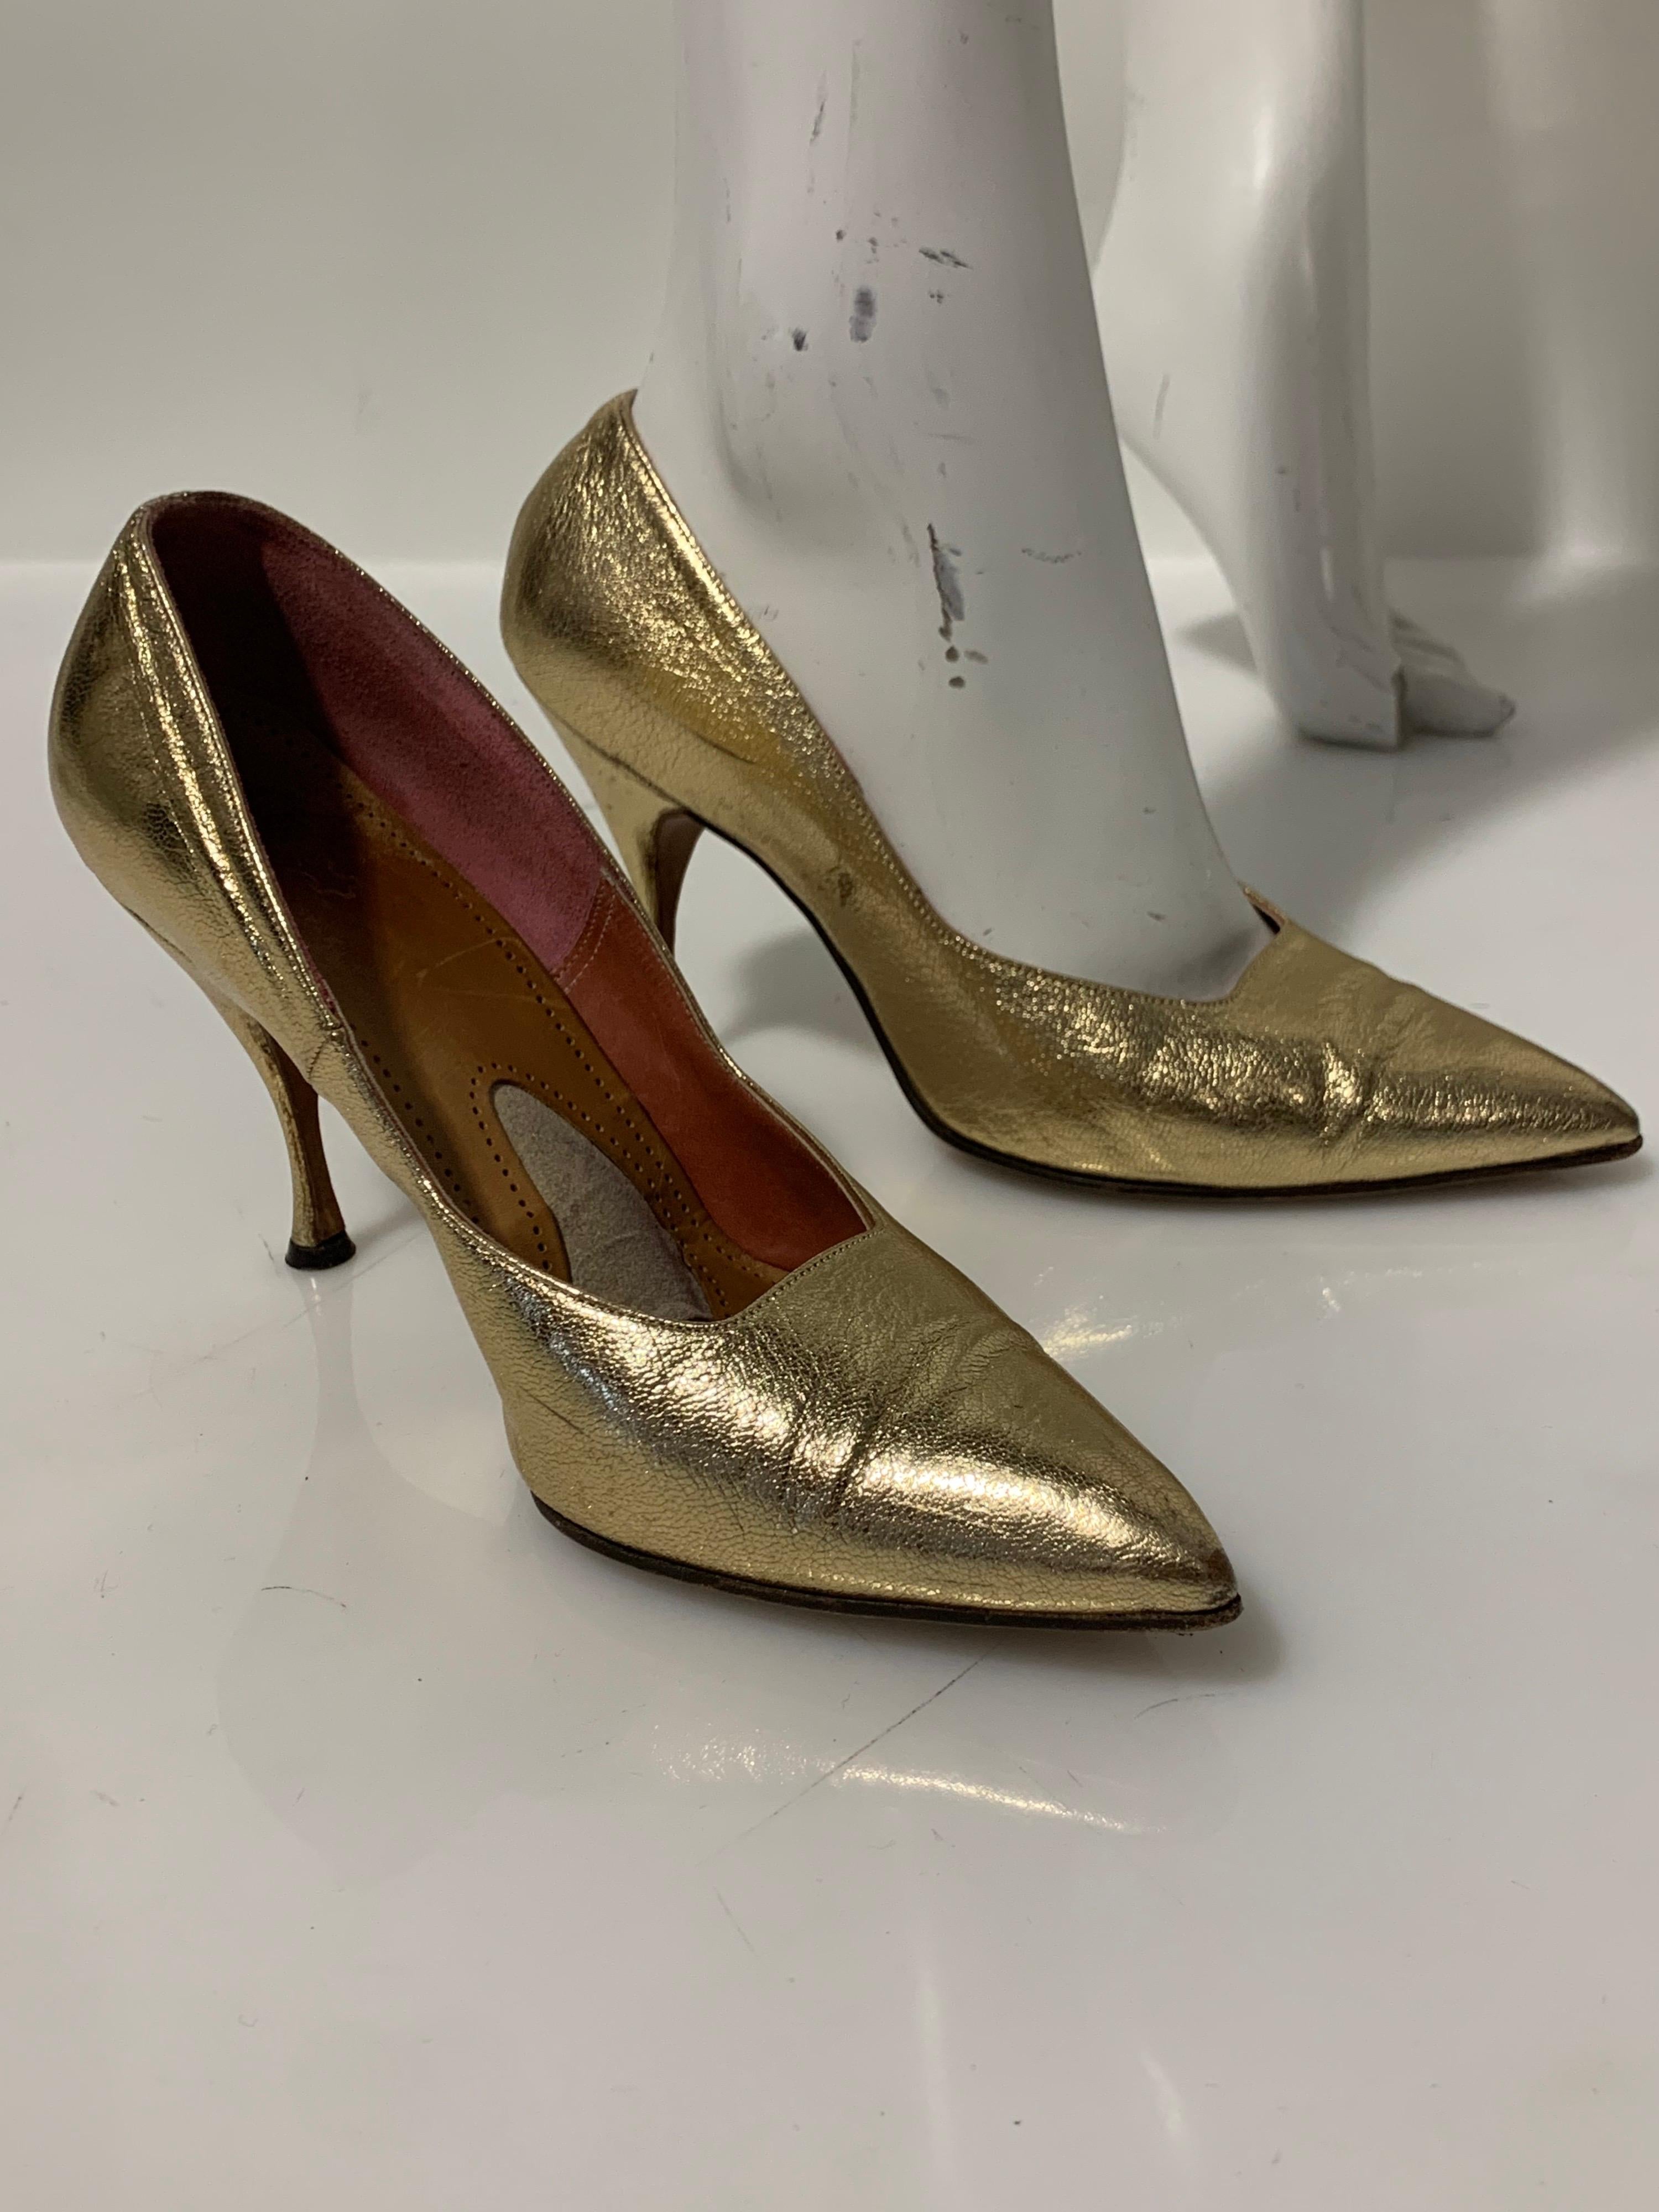 Women's 1950 Gold Metallic Leather Pointed Toe Stiletto Shoes Made In Germany Size 7B